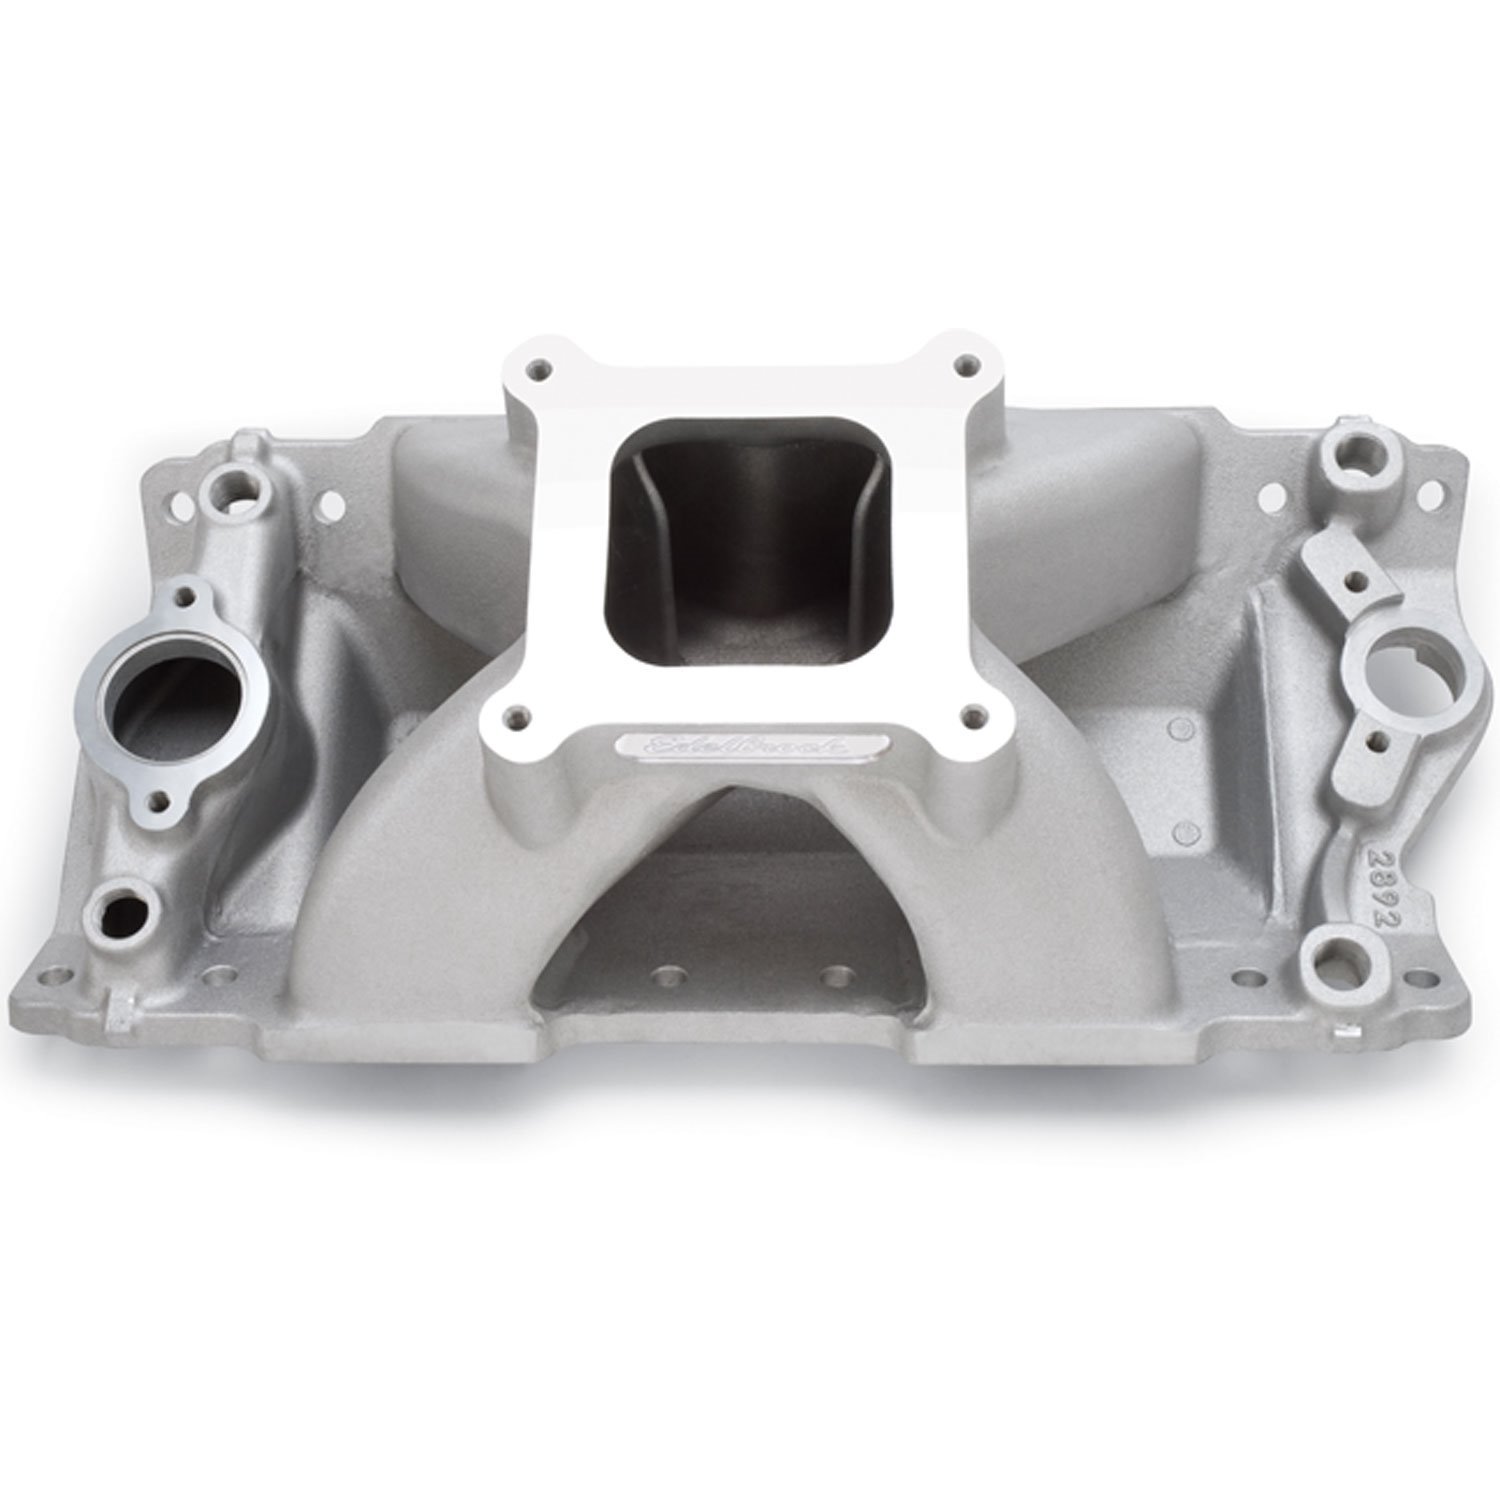 2892 Super Victor II Intake Manifold for Small Block Chevy 262-400ci